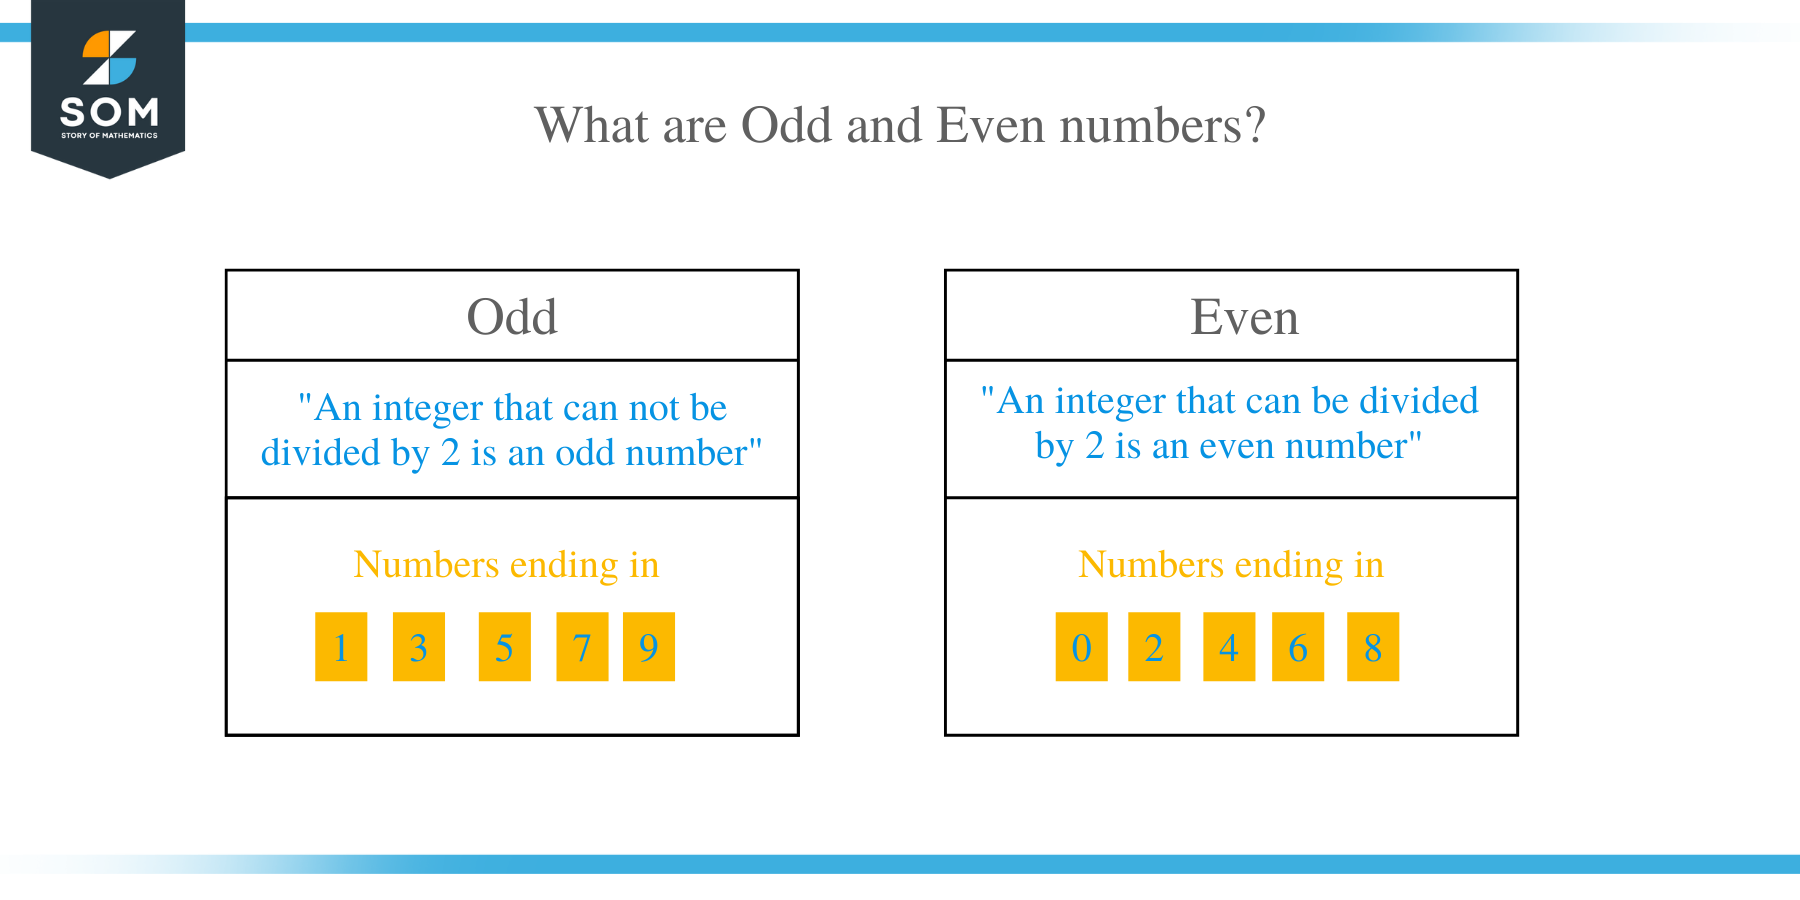 What are Odd and Even numbers?